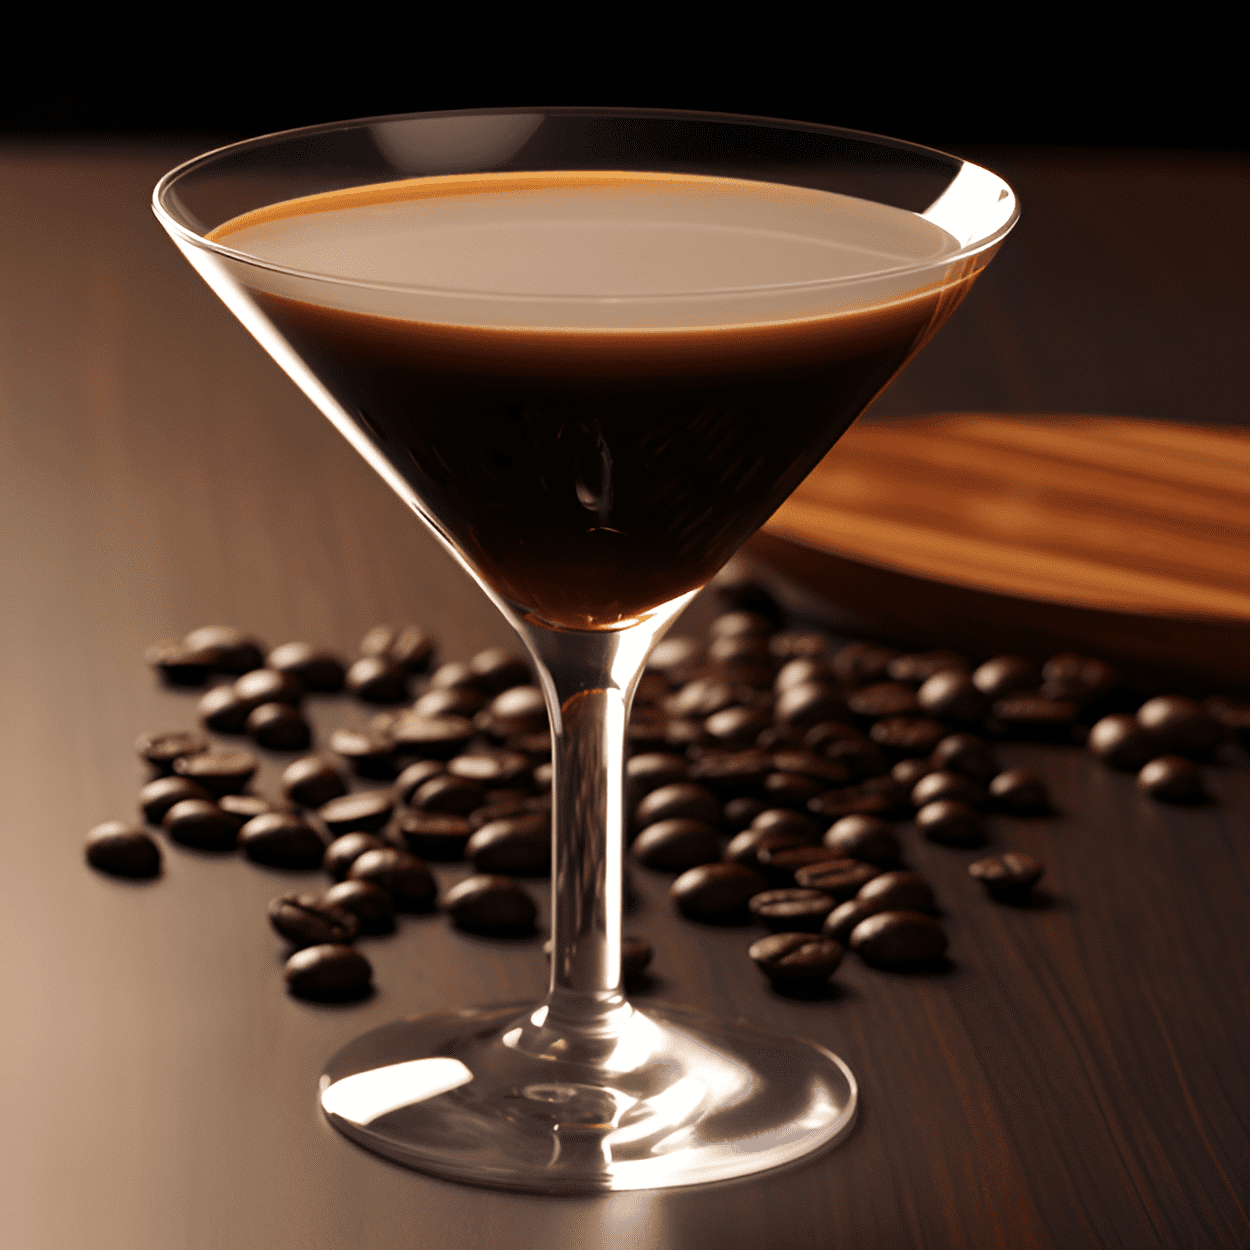 Kahlua Martini Cocktail Recipe - The Kahlua Martini is a robust and rich cocktail. It has a strong coffee flavor, thanks to the Kahlua, with a hint of sweetness. The vodka adds a kick, making it a strong, yet smooth drink.